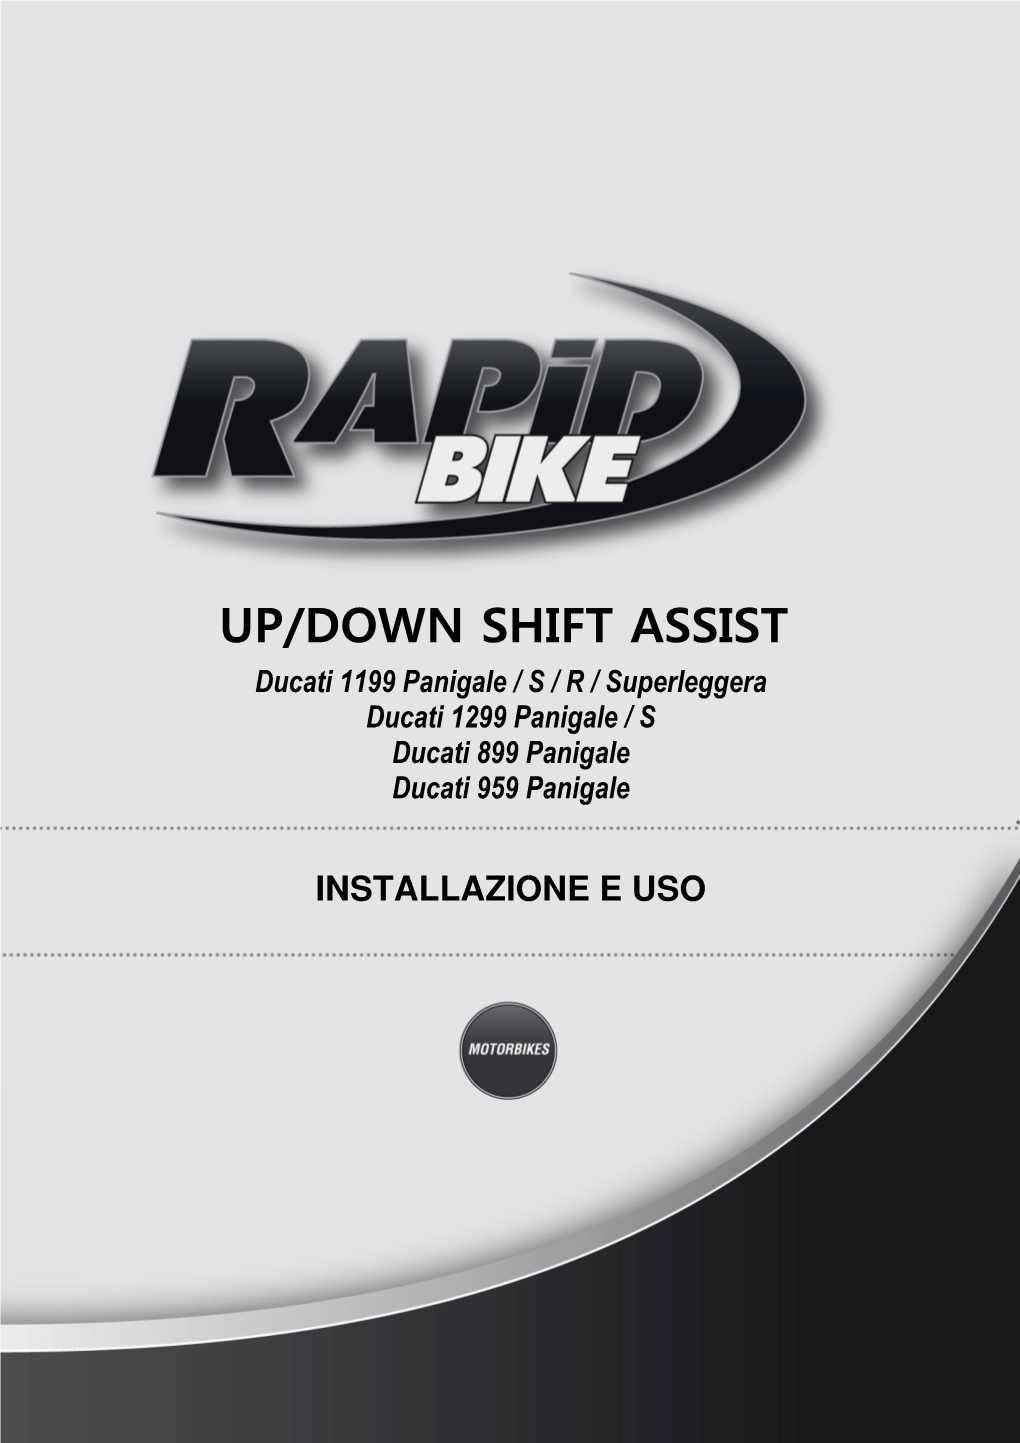 UP/DOWN SHIFT ASSIST Ducati 1199 Panigale / S / R / Superleggera Ducati 1299 Panigale / S Ducati 899 Panigale Ducati 959 Panigale